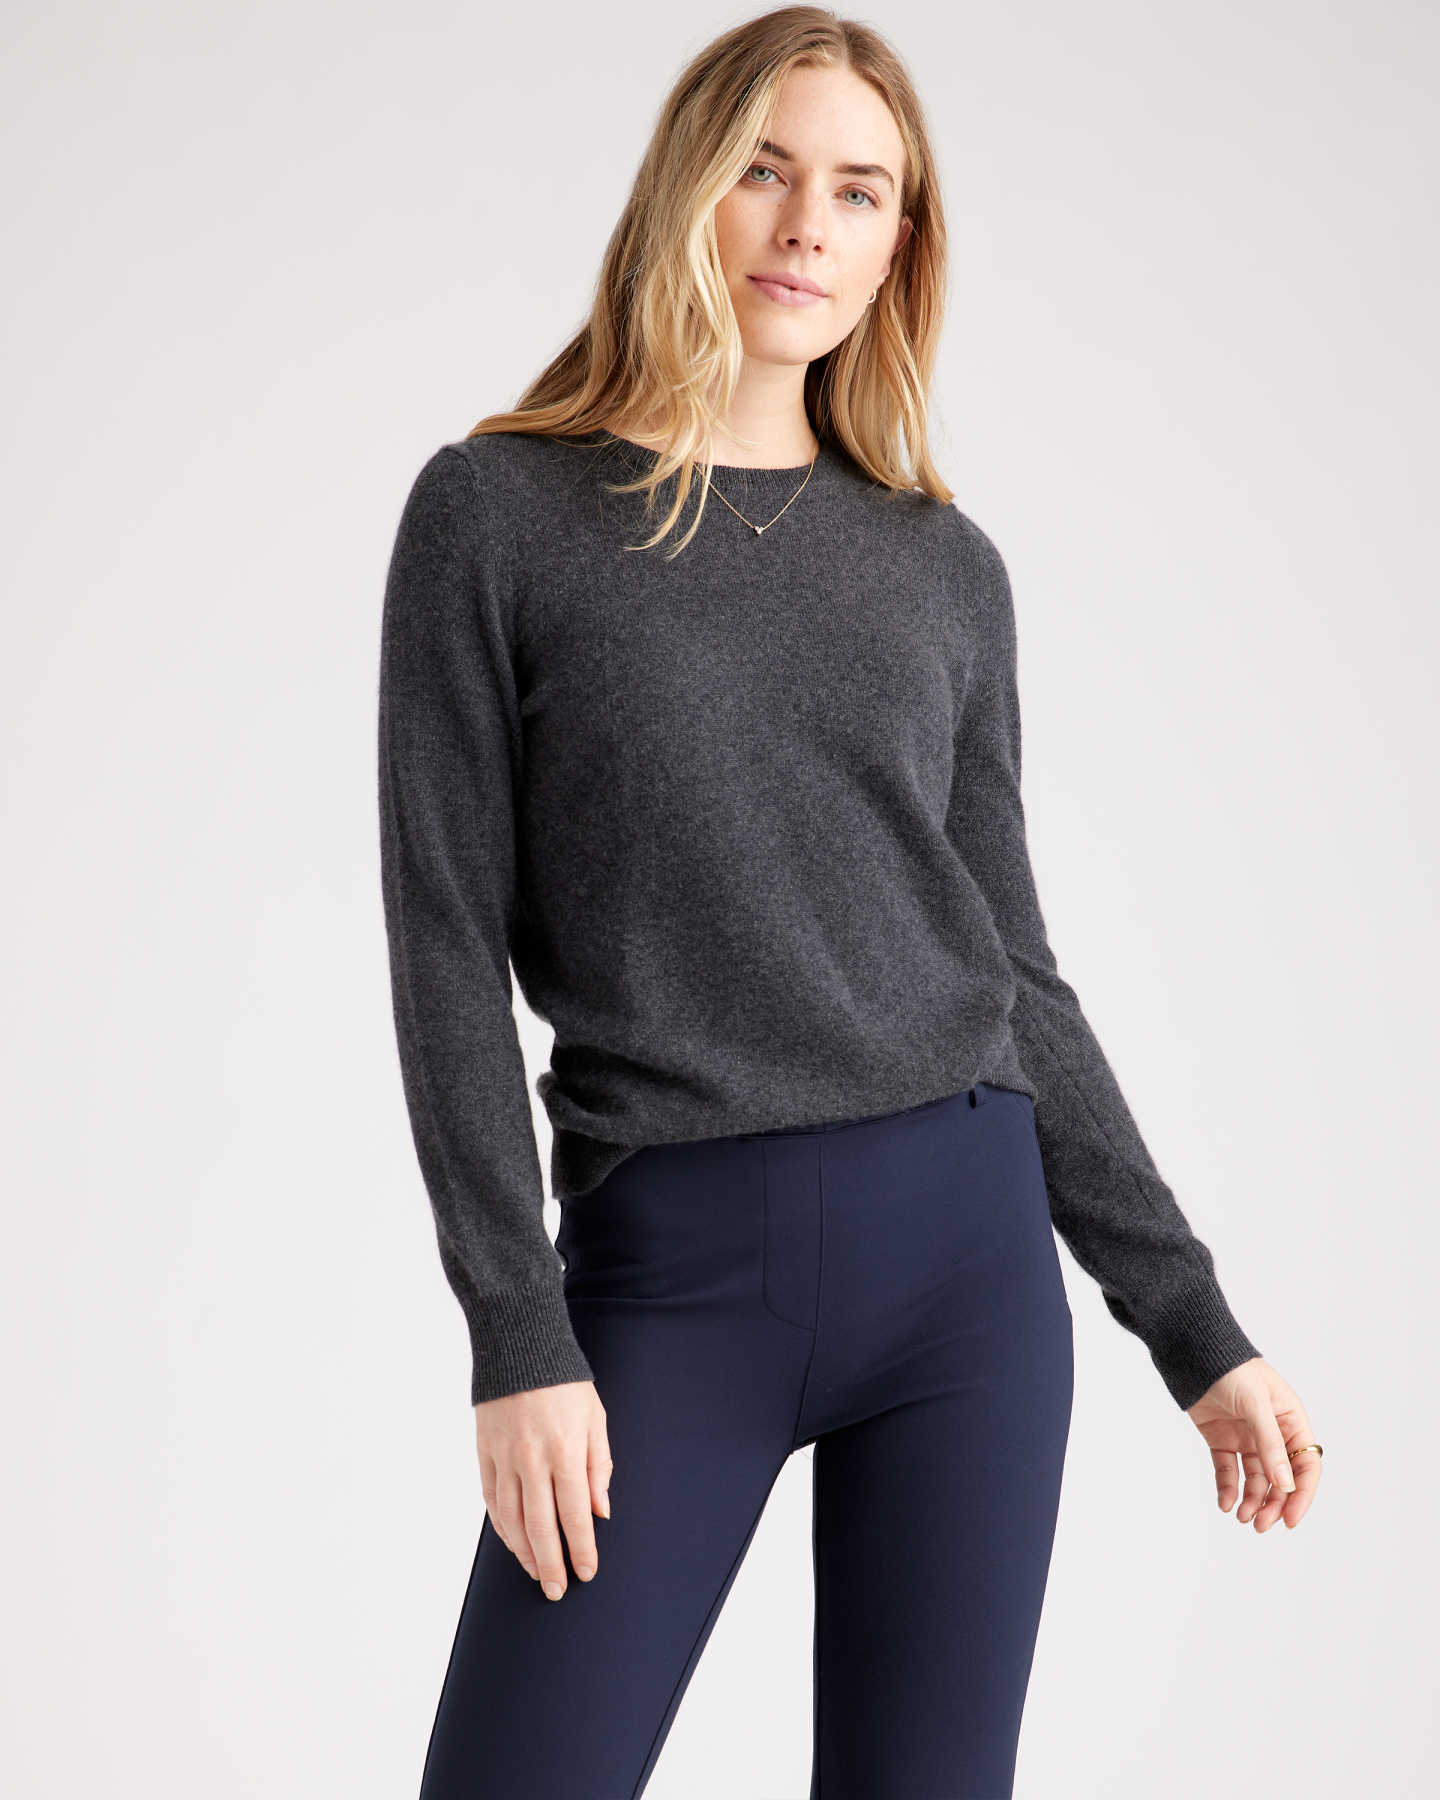 Luxe Baby Cashmere Crewneck Sweater - Charcoal - 1